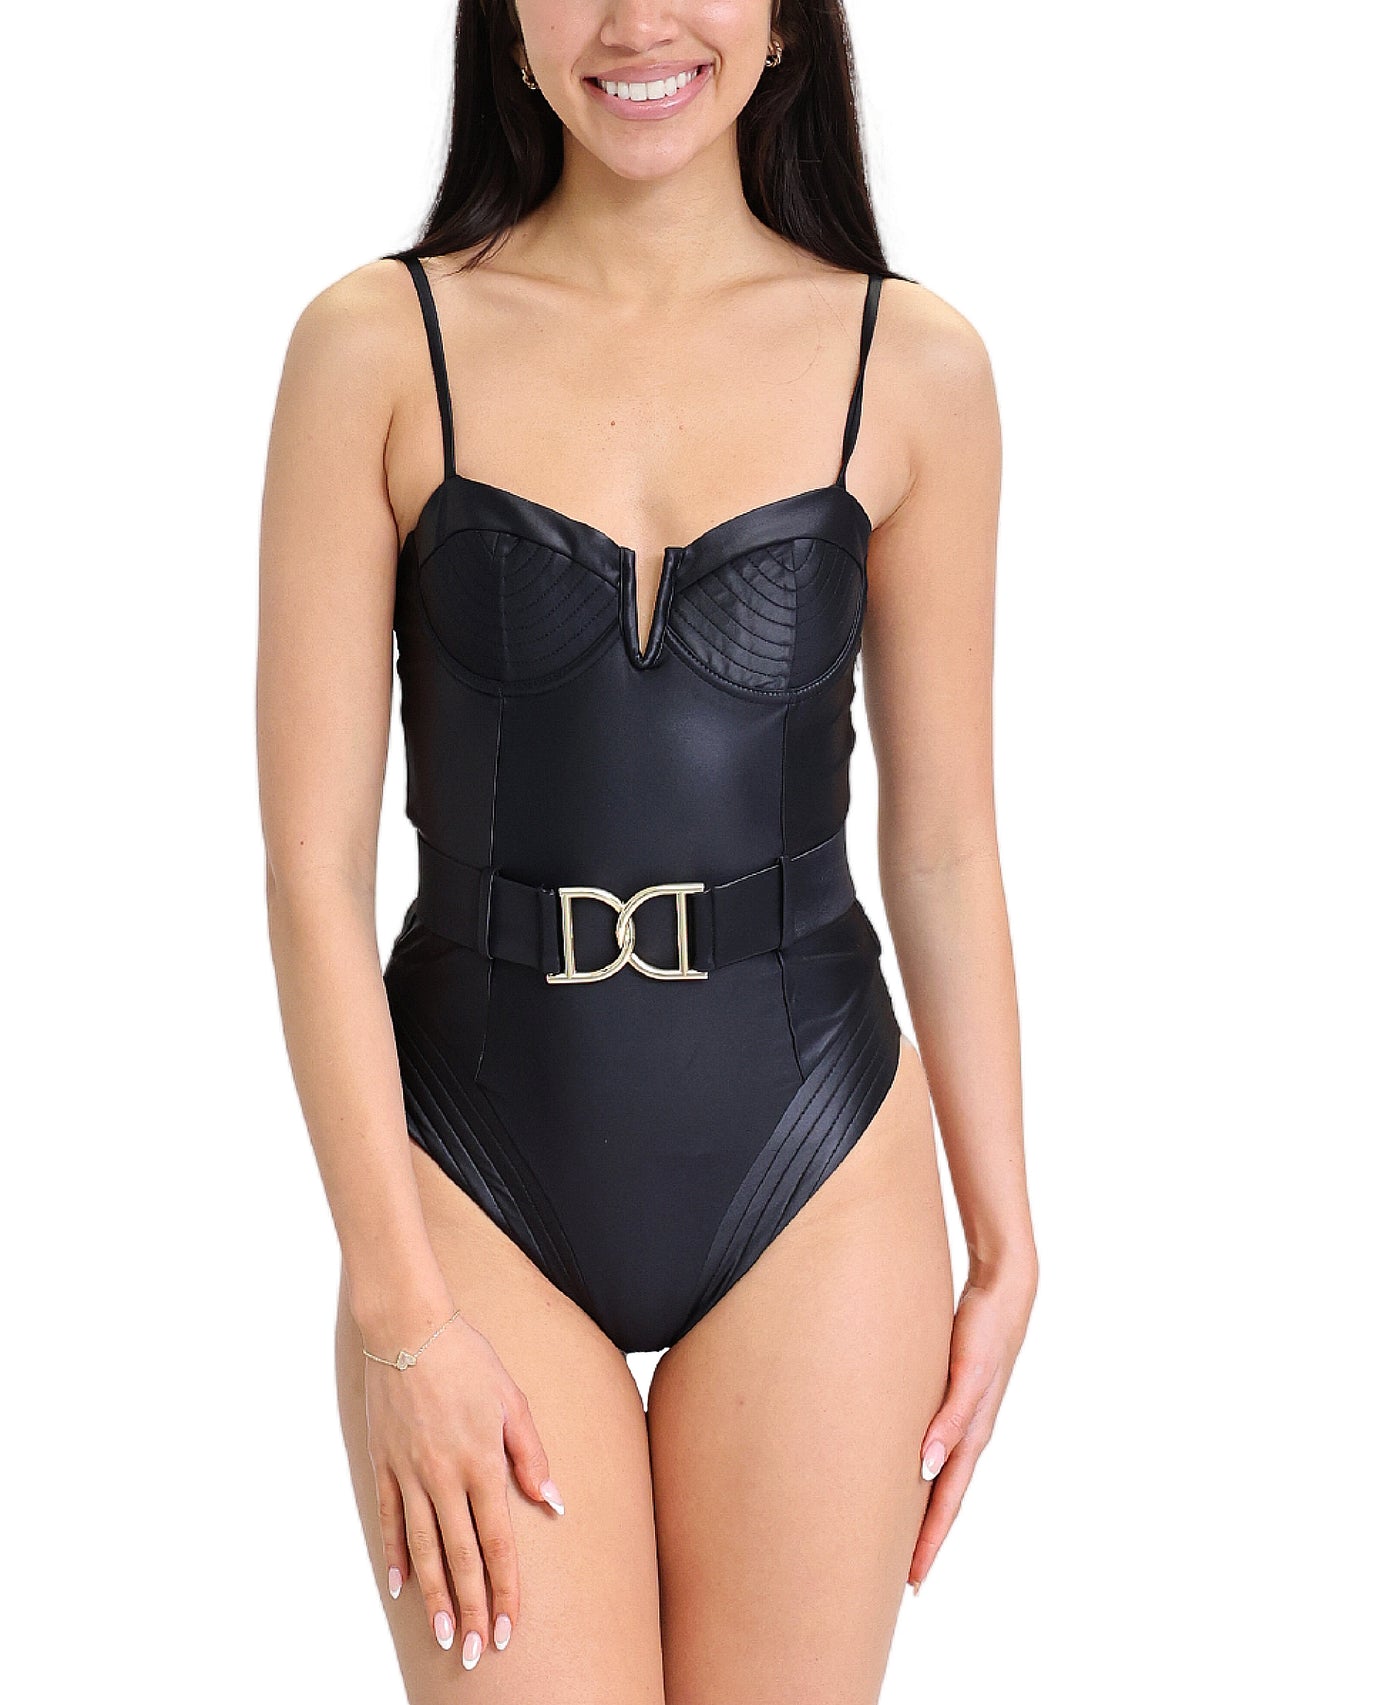 Satin Bustier One Piece Swimsuit image 1